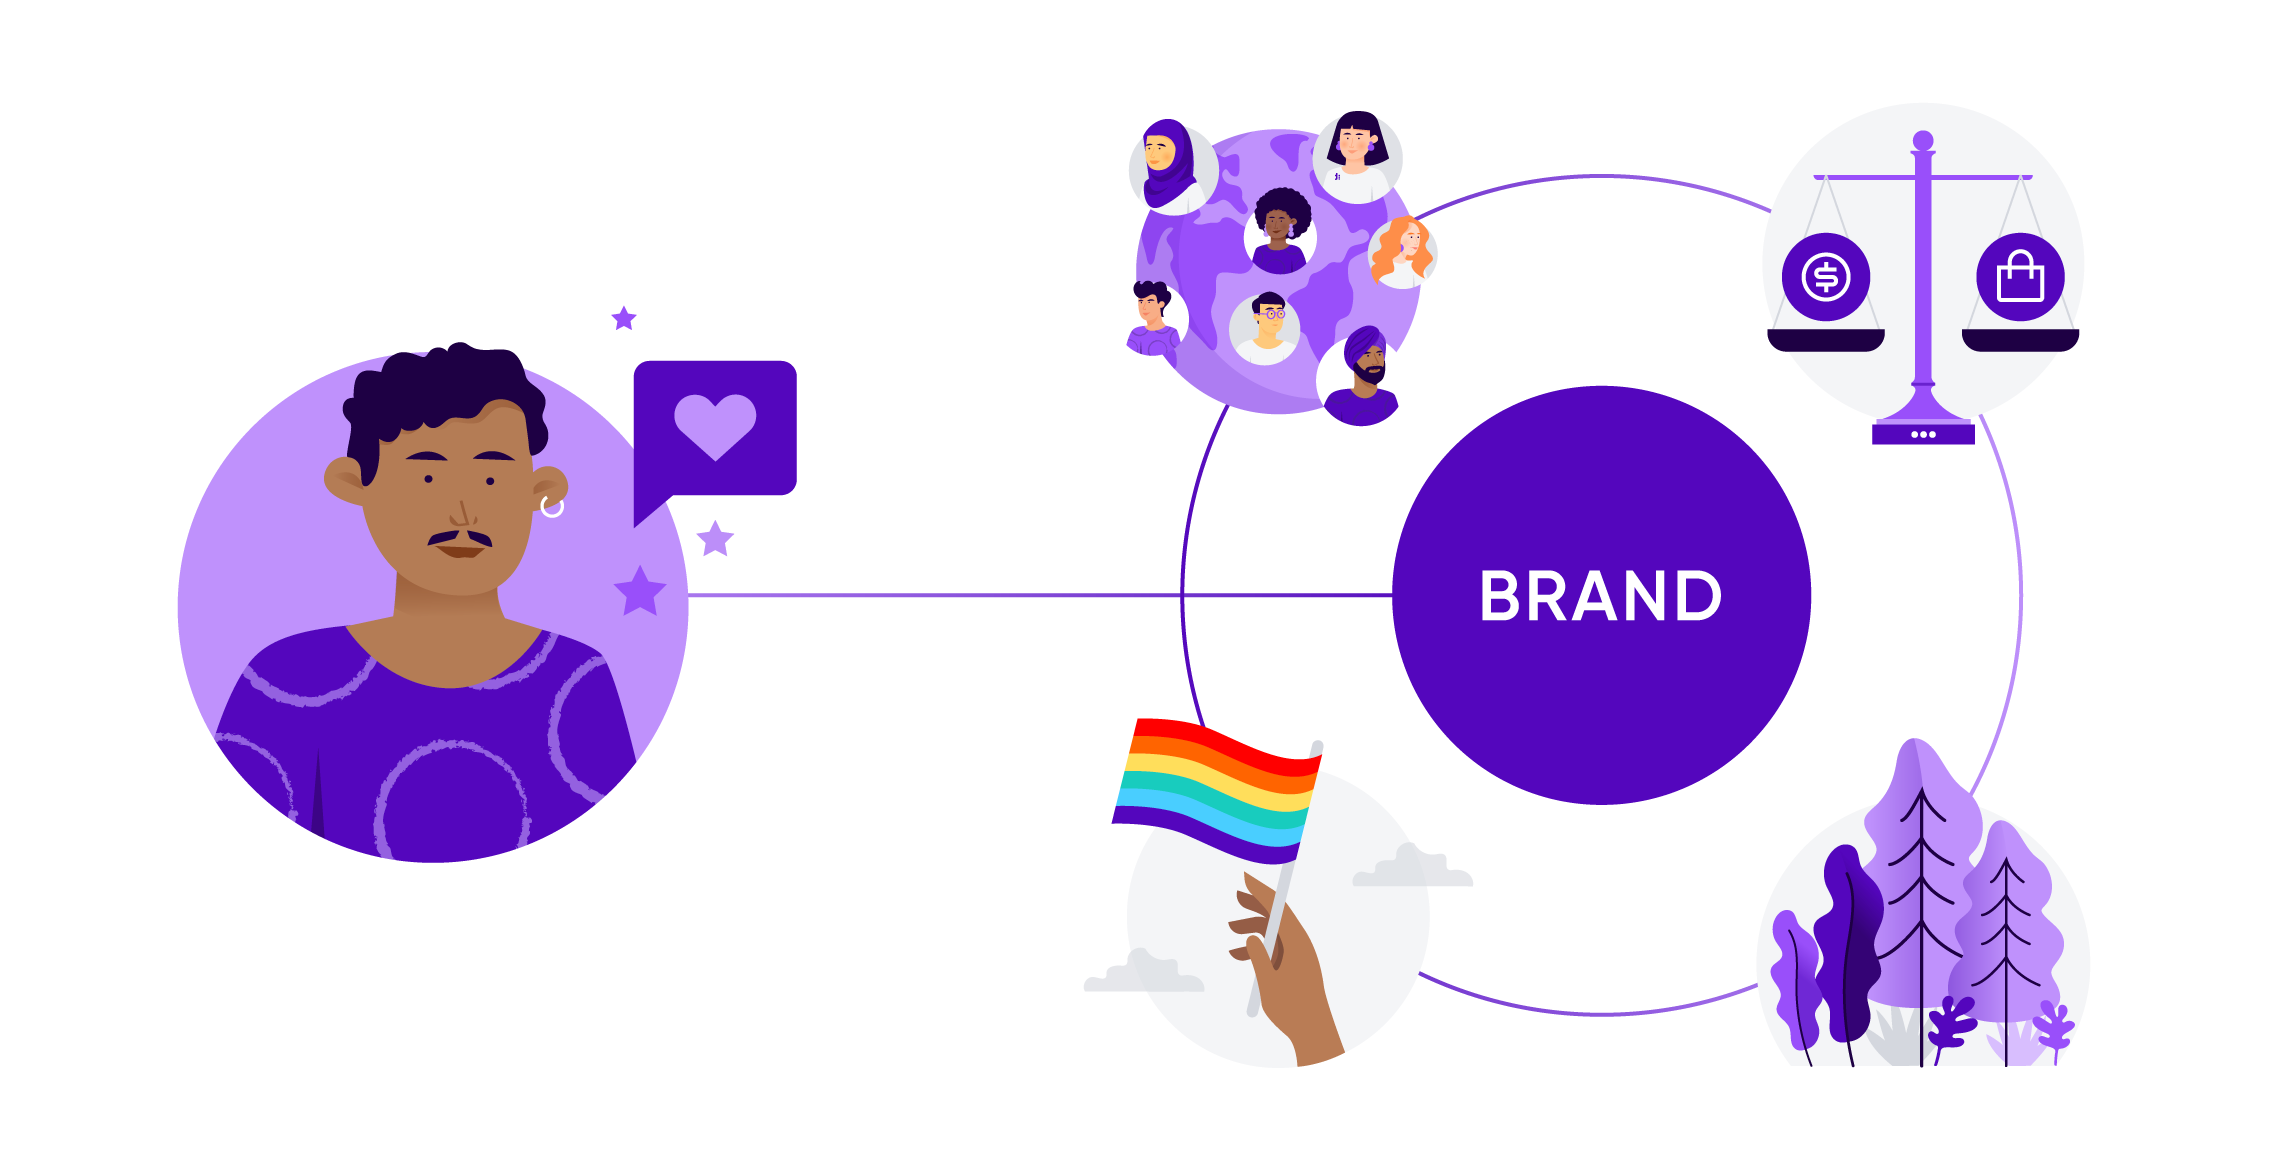 Customer connections to brand values